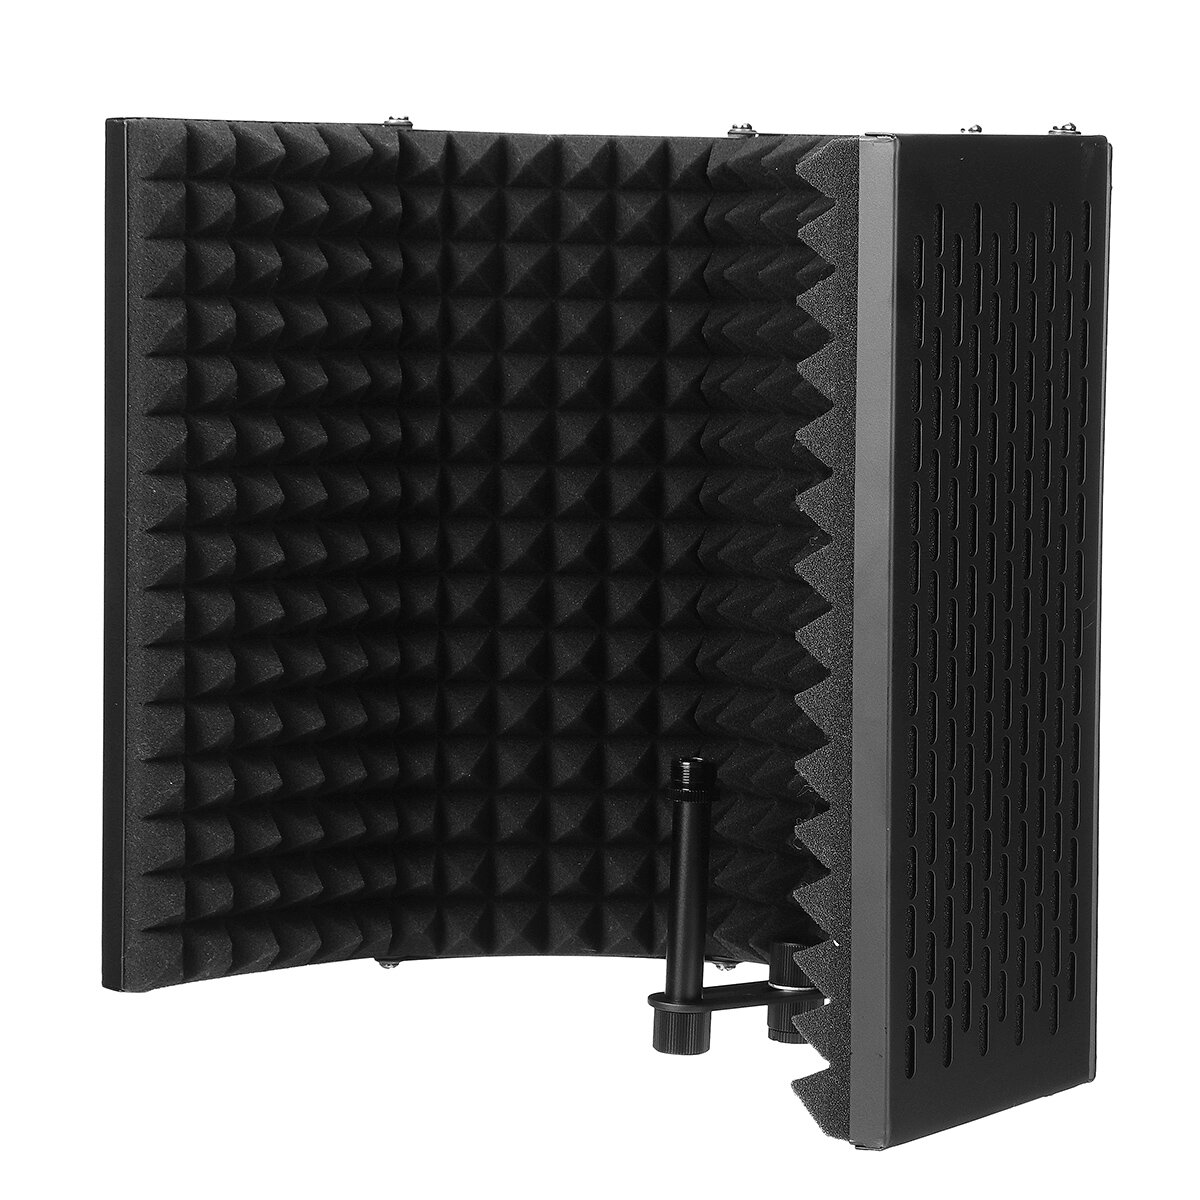 Foldable Microphone Acoustic Isolation Shield Acoustic Foams Studio Panel for Recording Live Broadca